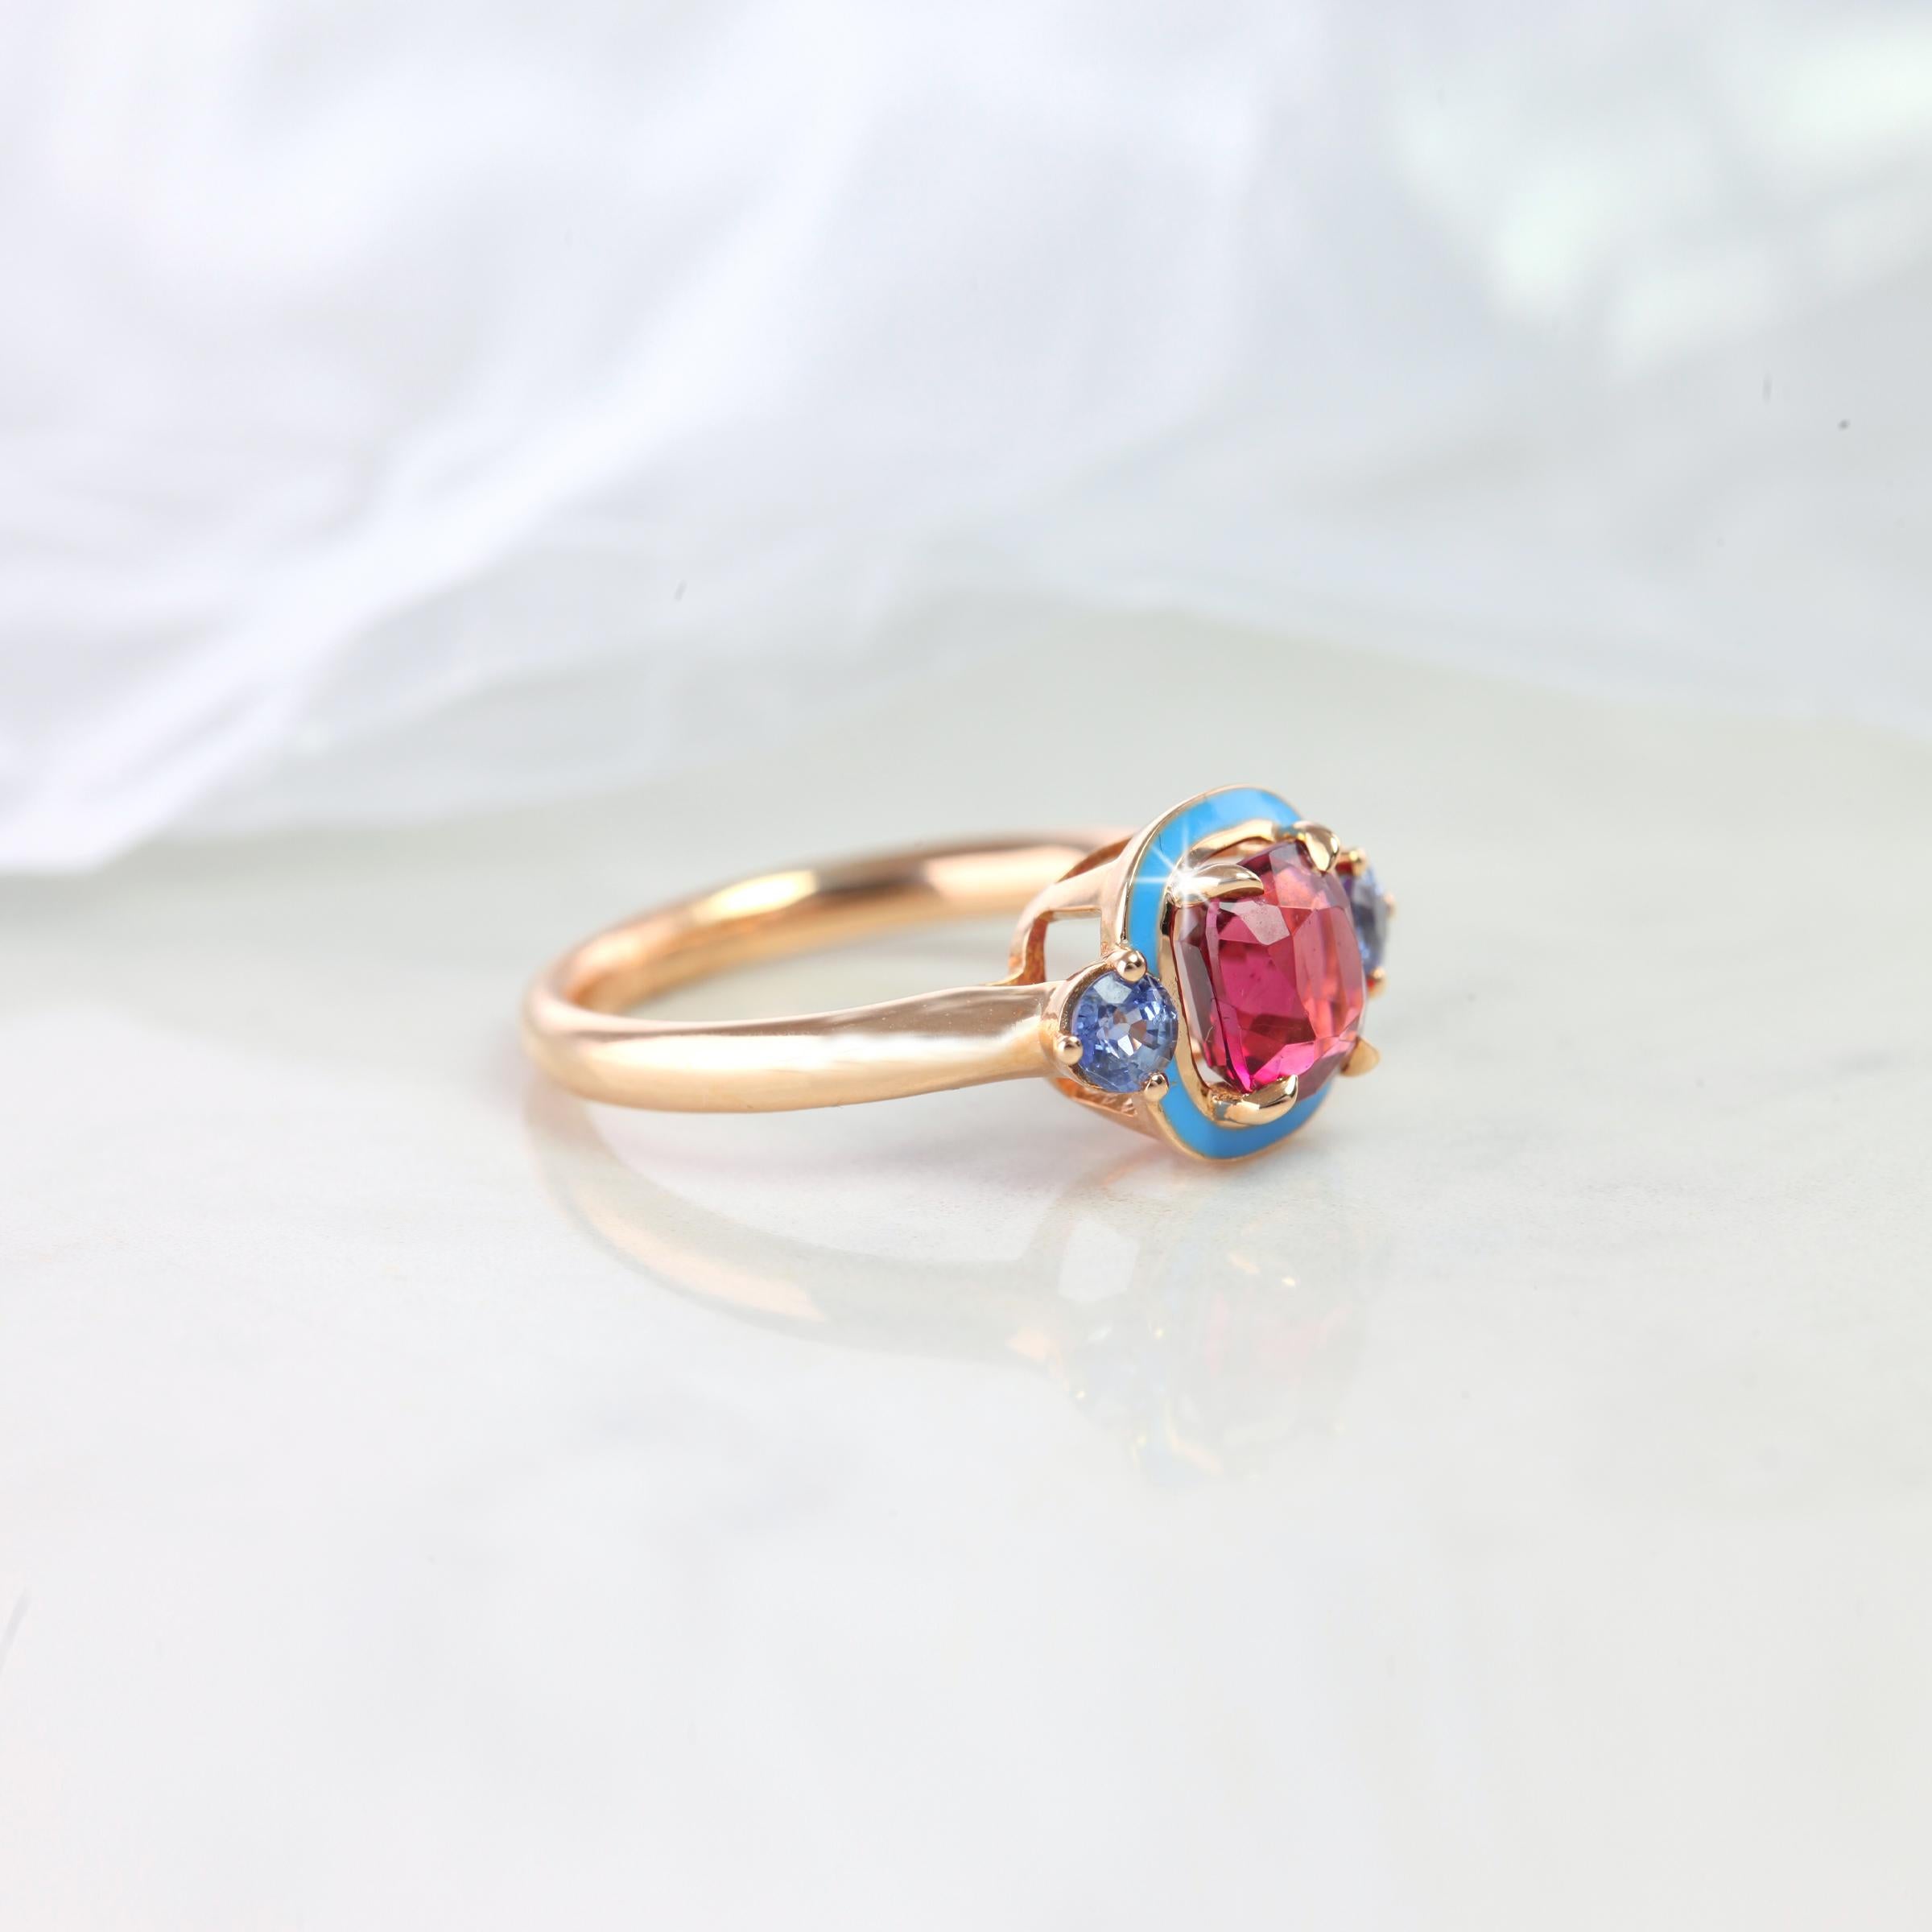 Natural Tourmaline And Ceylon Sapphire Cocktail Ring

Gold metal: 14k Rose Gold
GemStone Shape: Cushion Cut
Main Stone: 3.35Carats
Side Stones: 0.24 Carats
Total Carat Weight: 3.59Carats
Color: Pink
Clarity: Clean
Comments: Art Deco Ring
Cut: Very